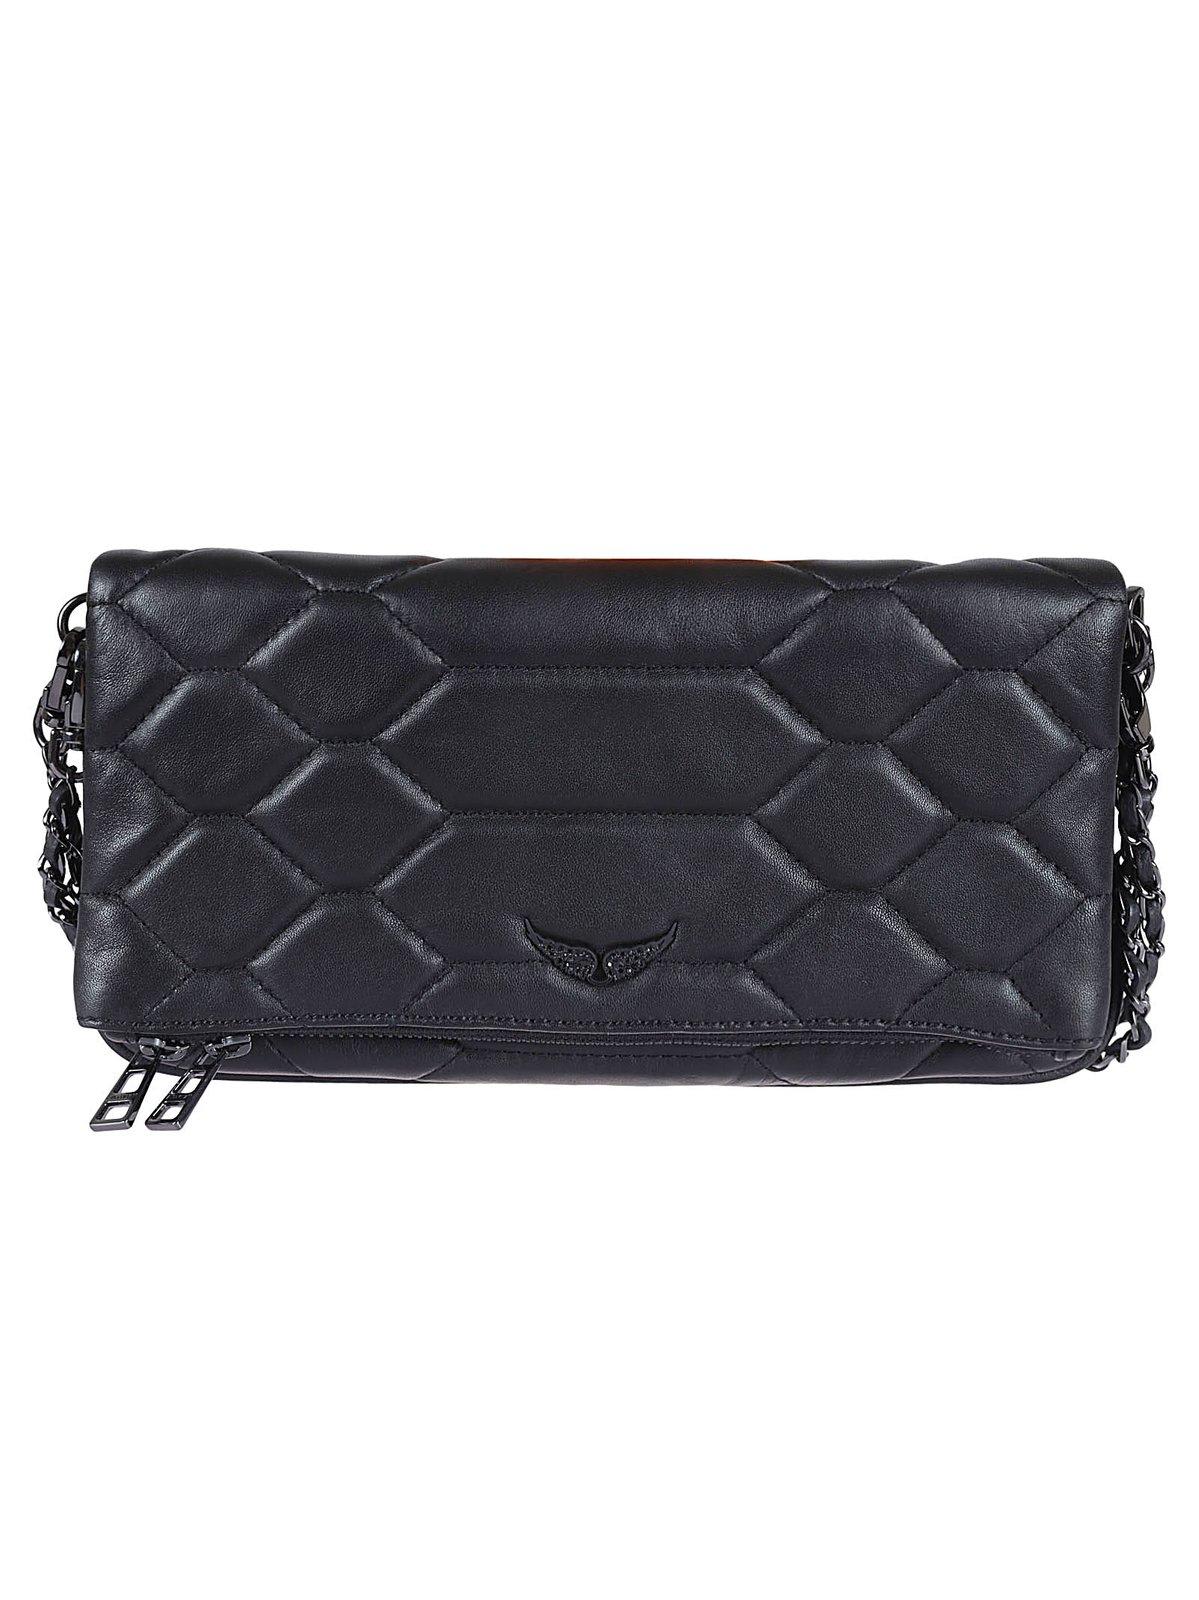 Zadig&Voltaire Rock Leather Clutch Bag - Farfetch